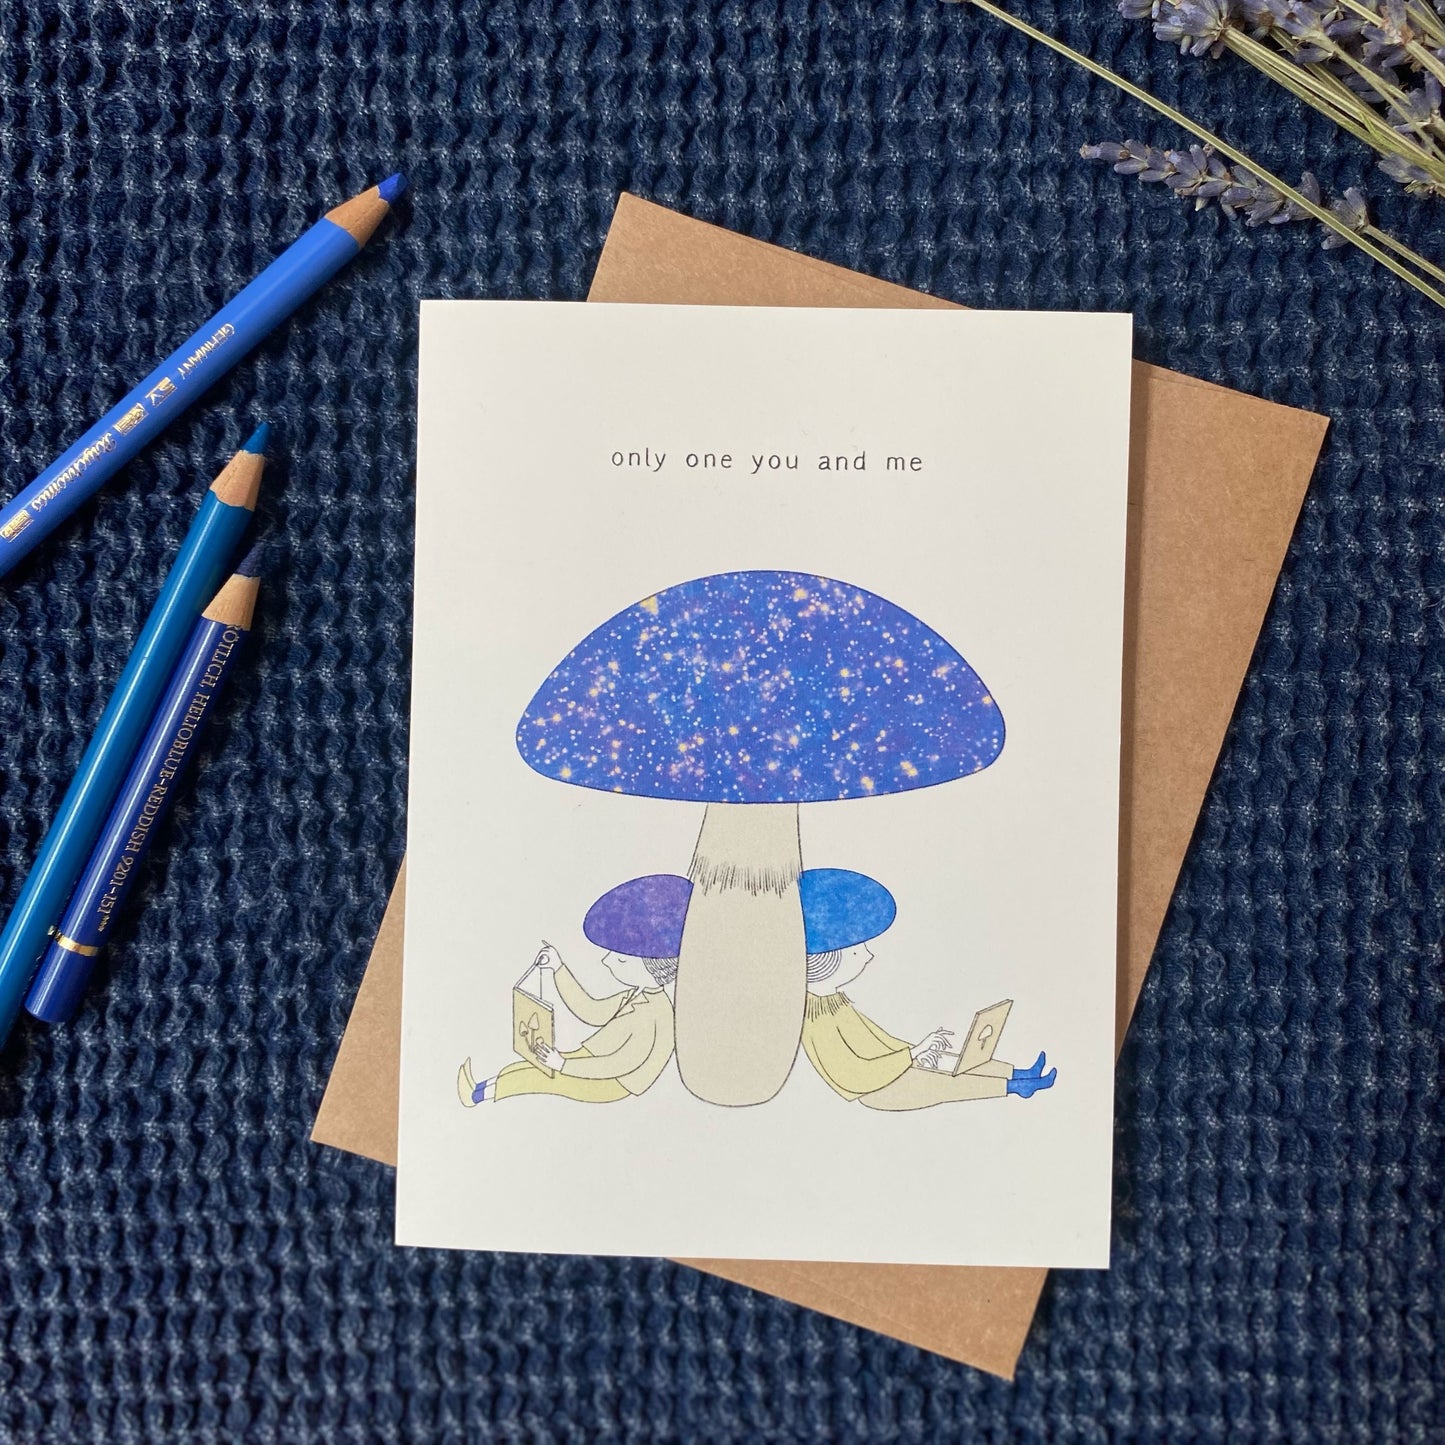 unique love and friendship card that says ”only one you and me” with the illustration of two mushroom people under a big mushroom with the universe on it